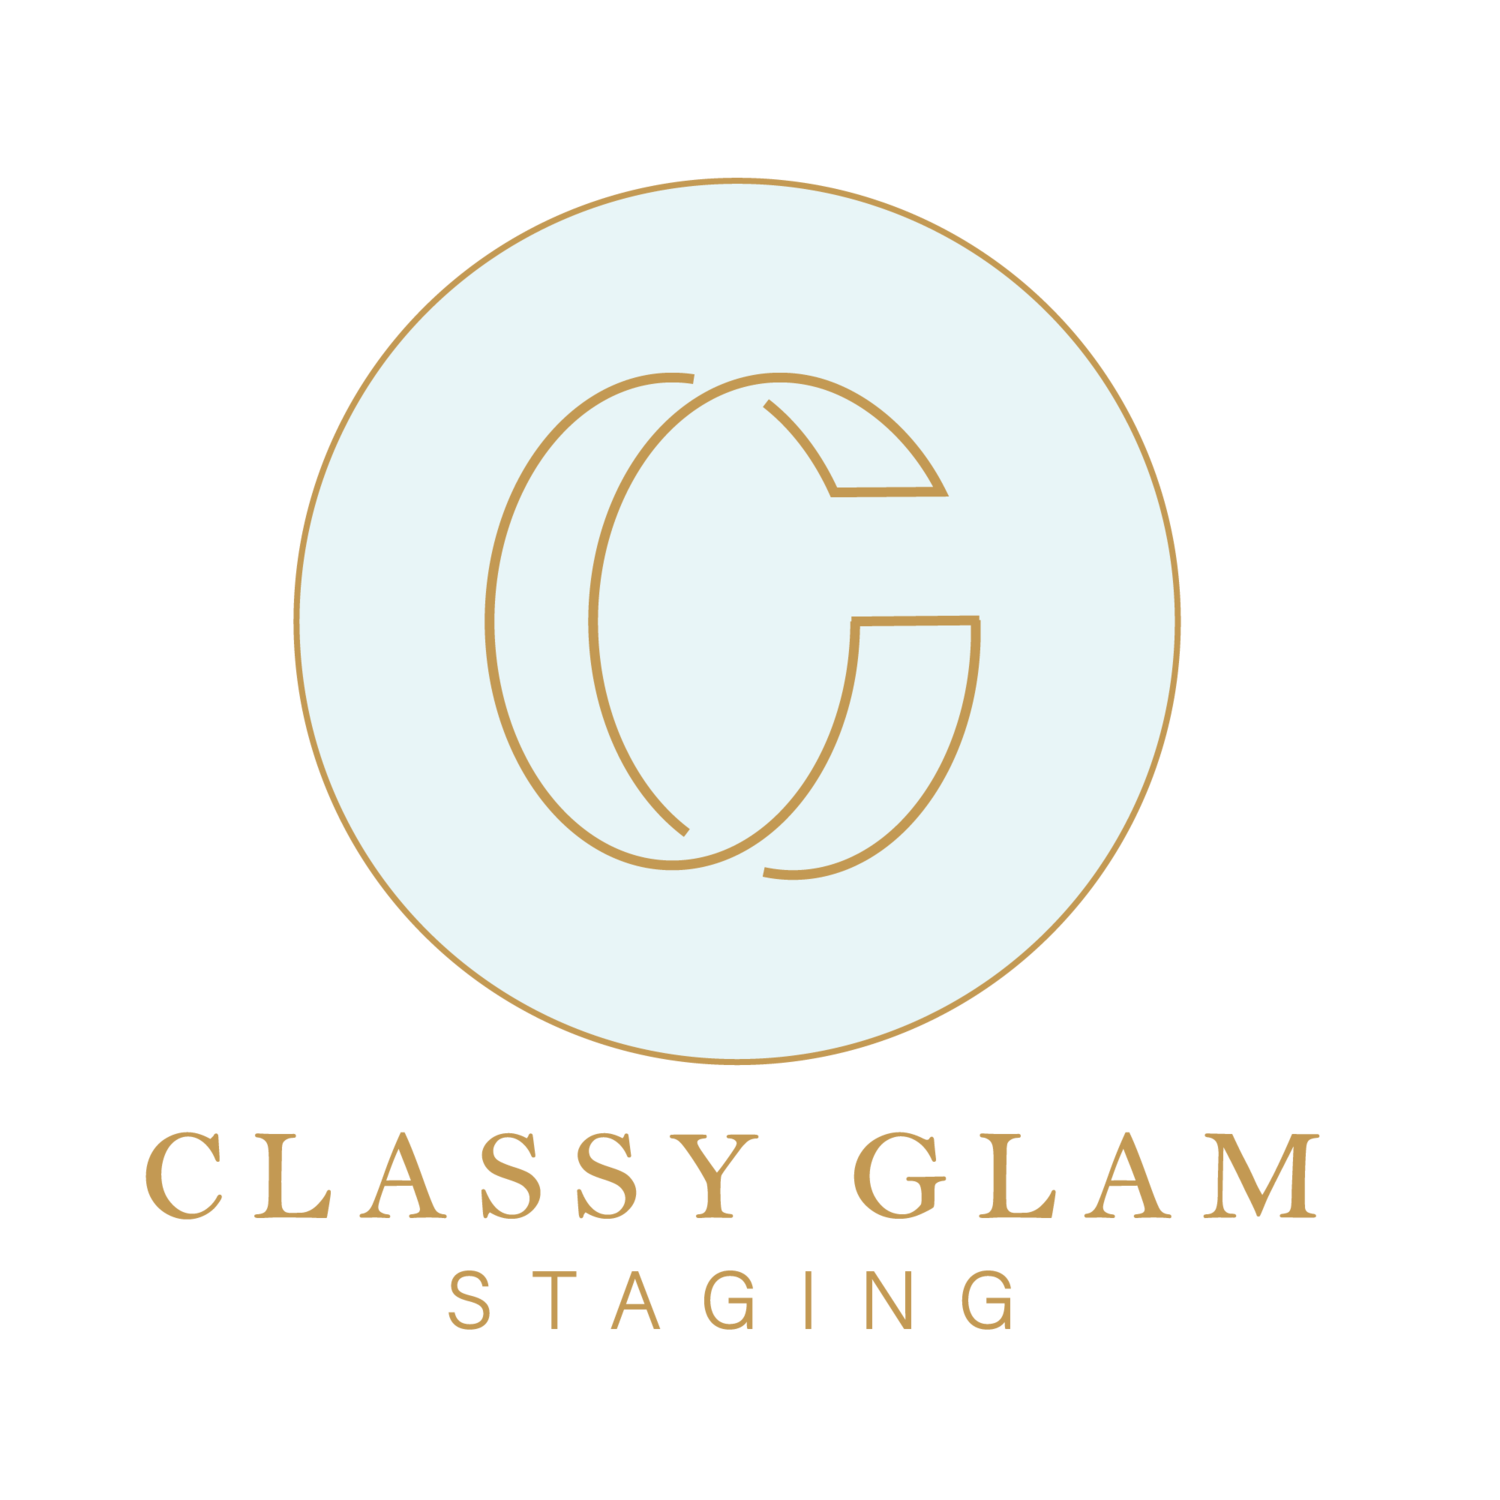 Classy Glam Staging